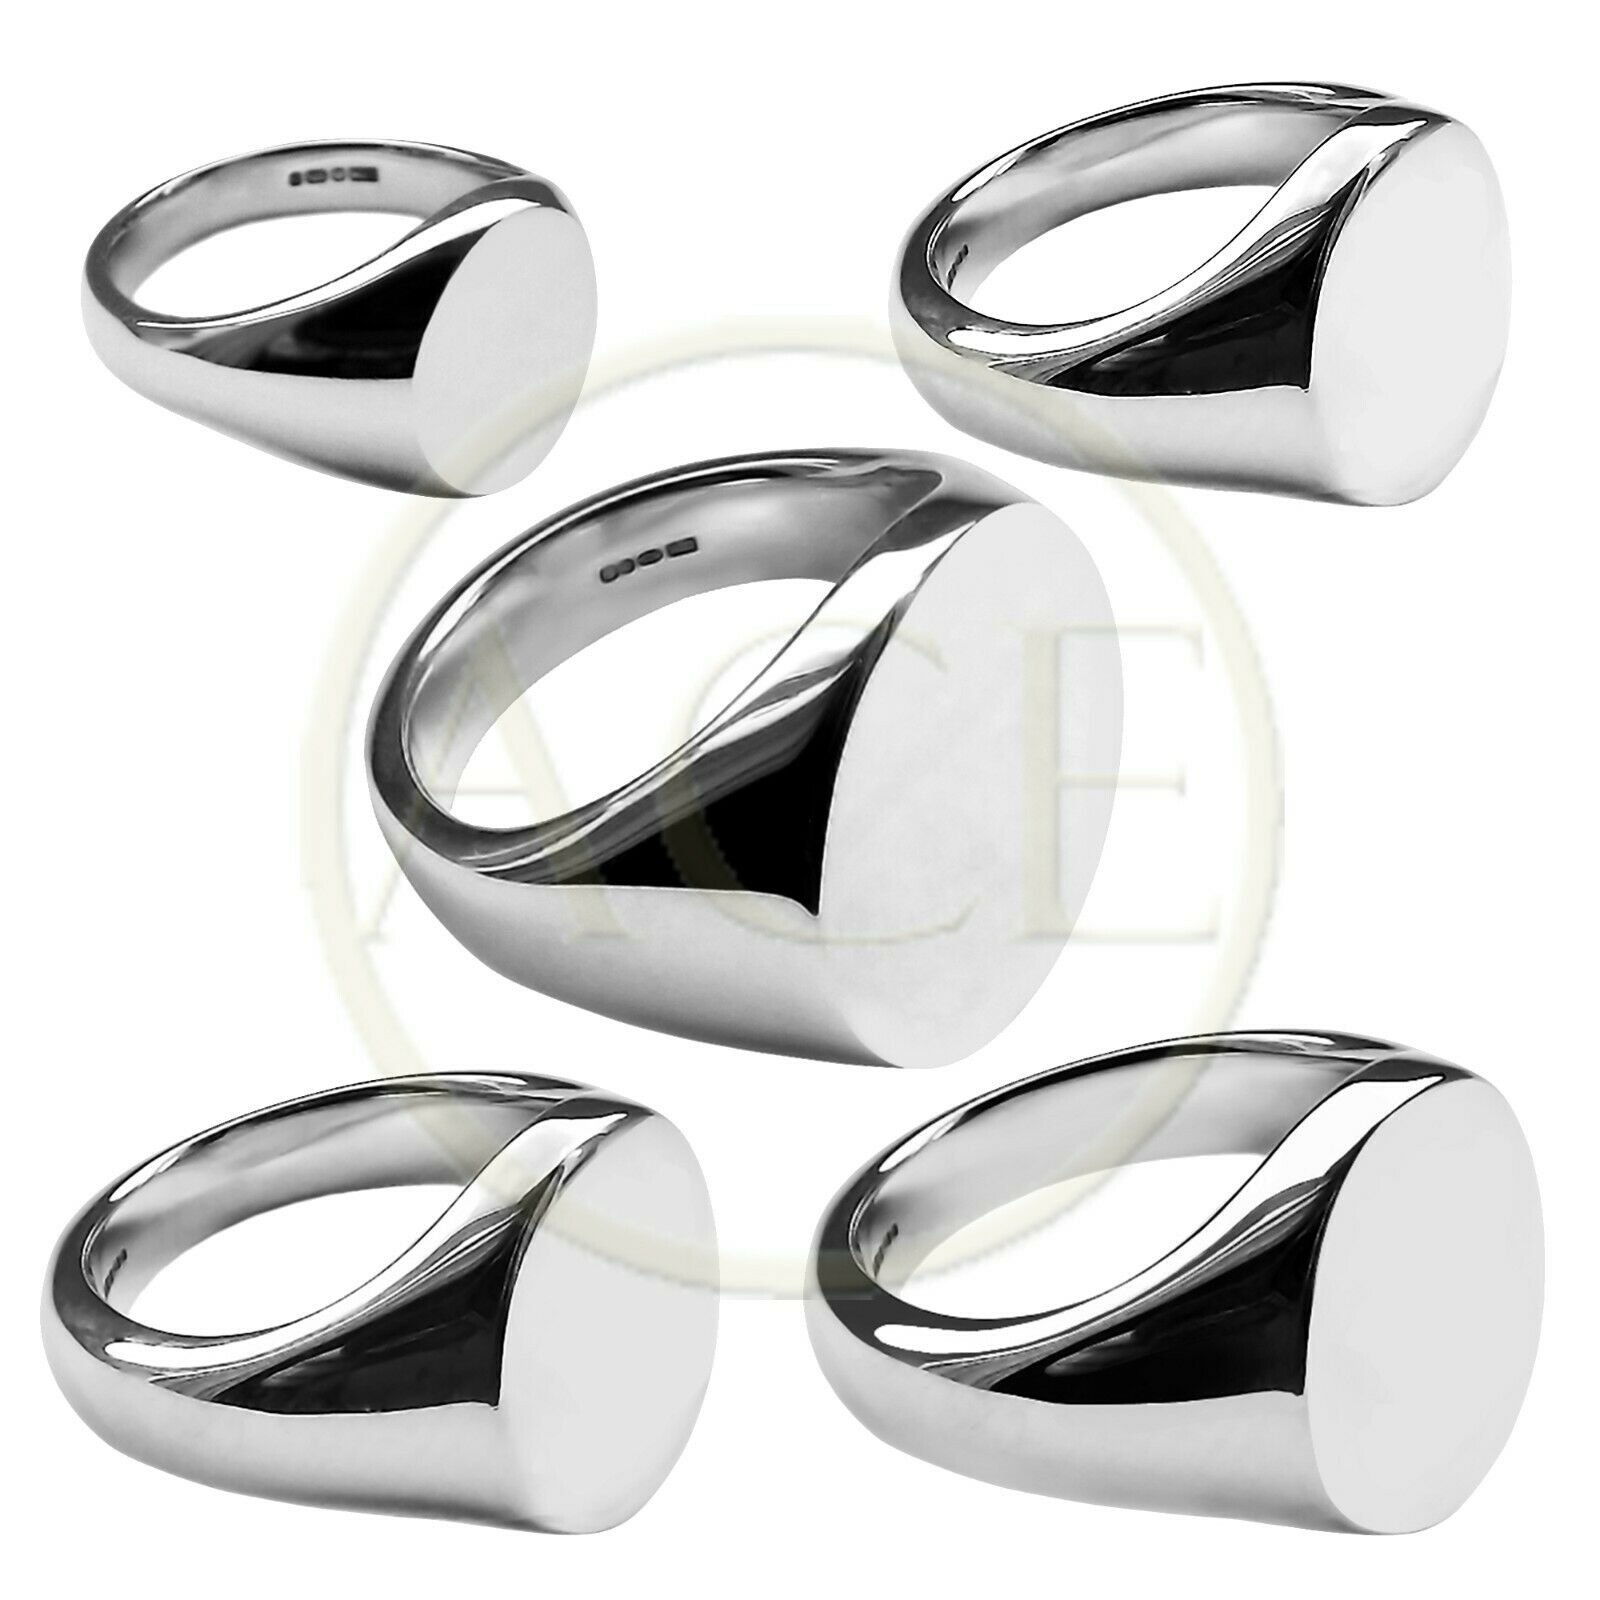 NEW 925 Solid Sterling Silver Oval Signet Rings UK Hallmarked Family Crest rings